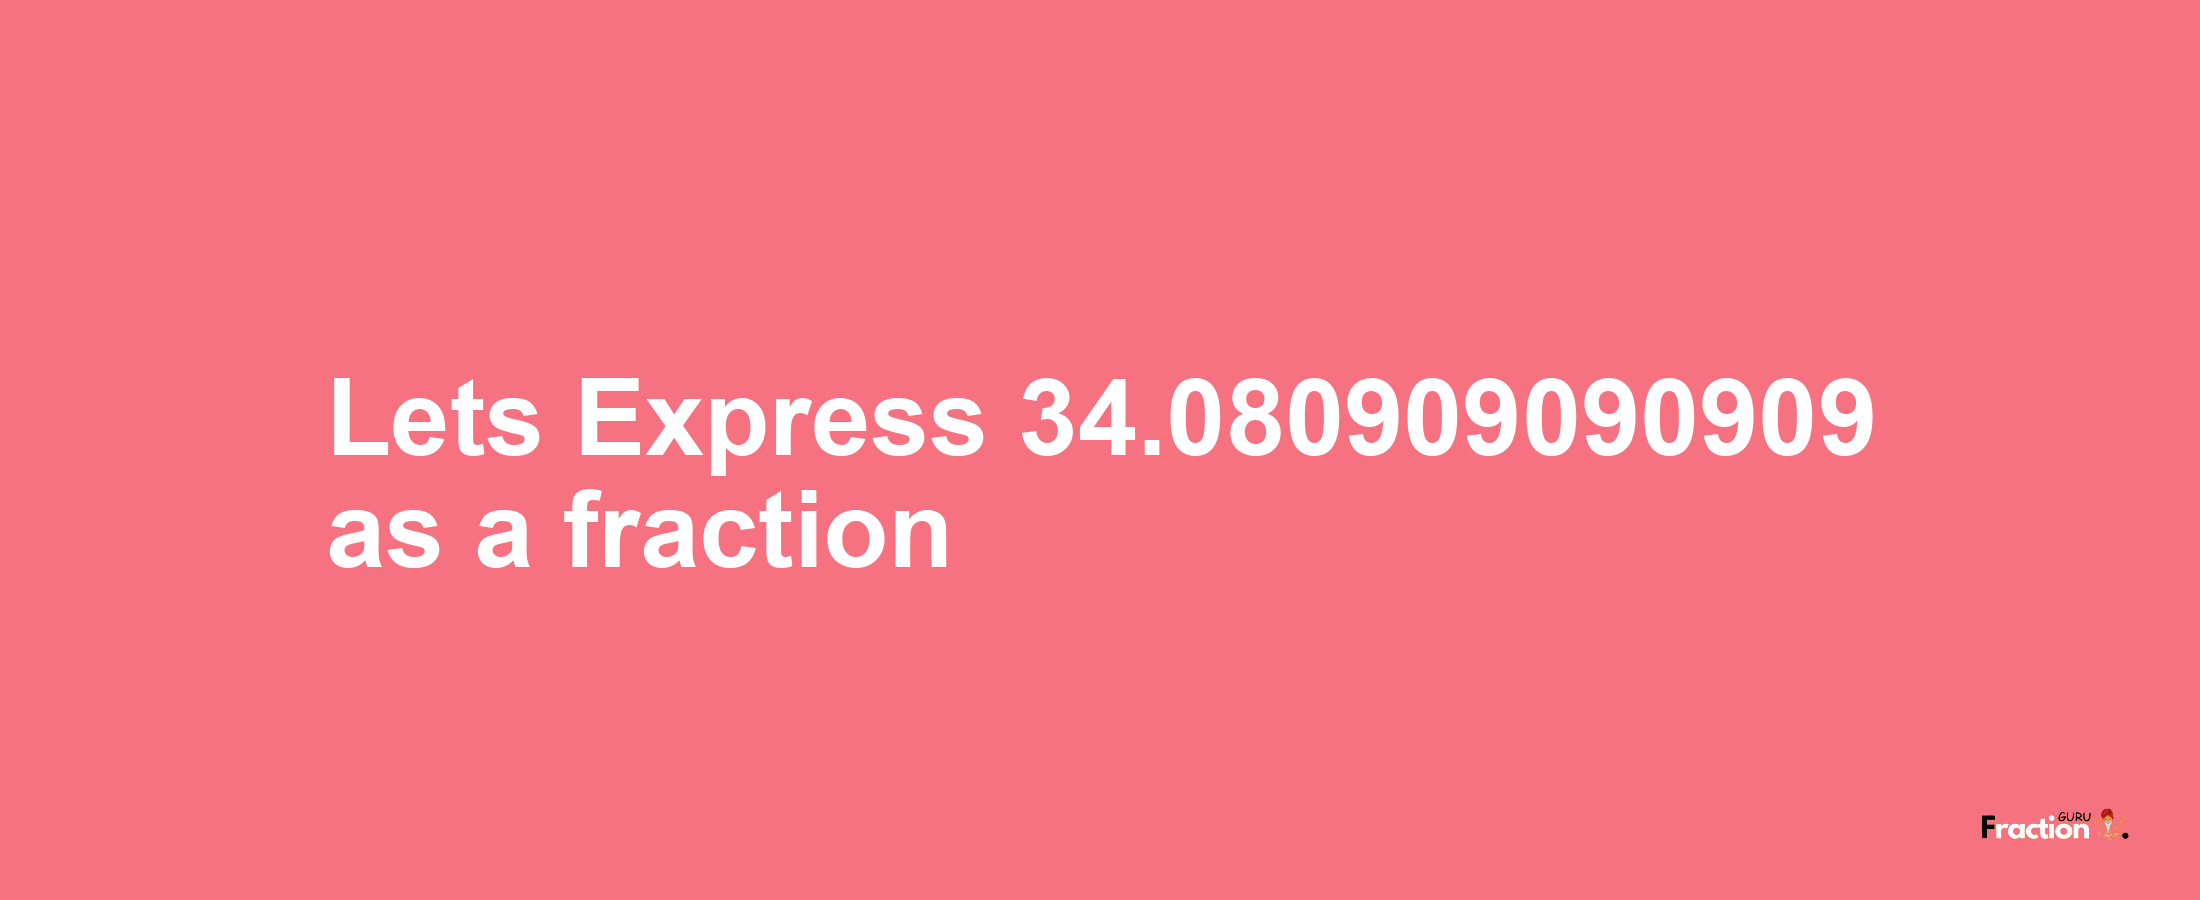 Lets Express 34.080909090909 as afraction